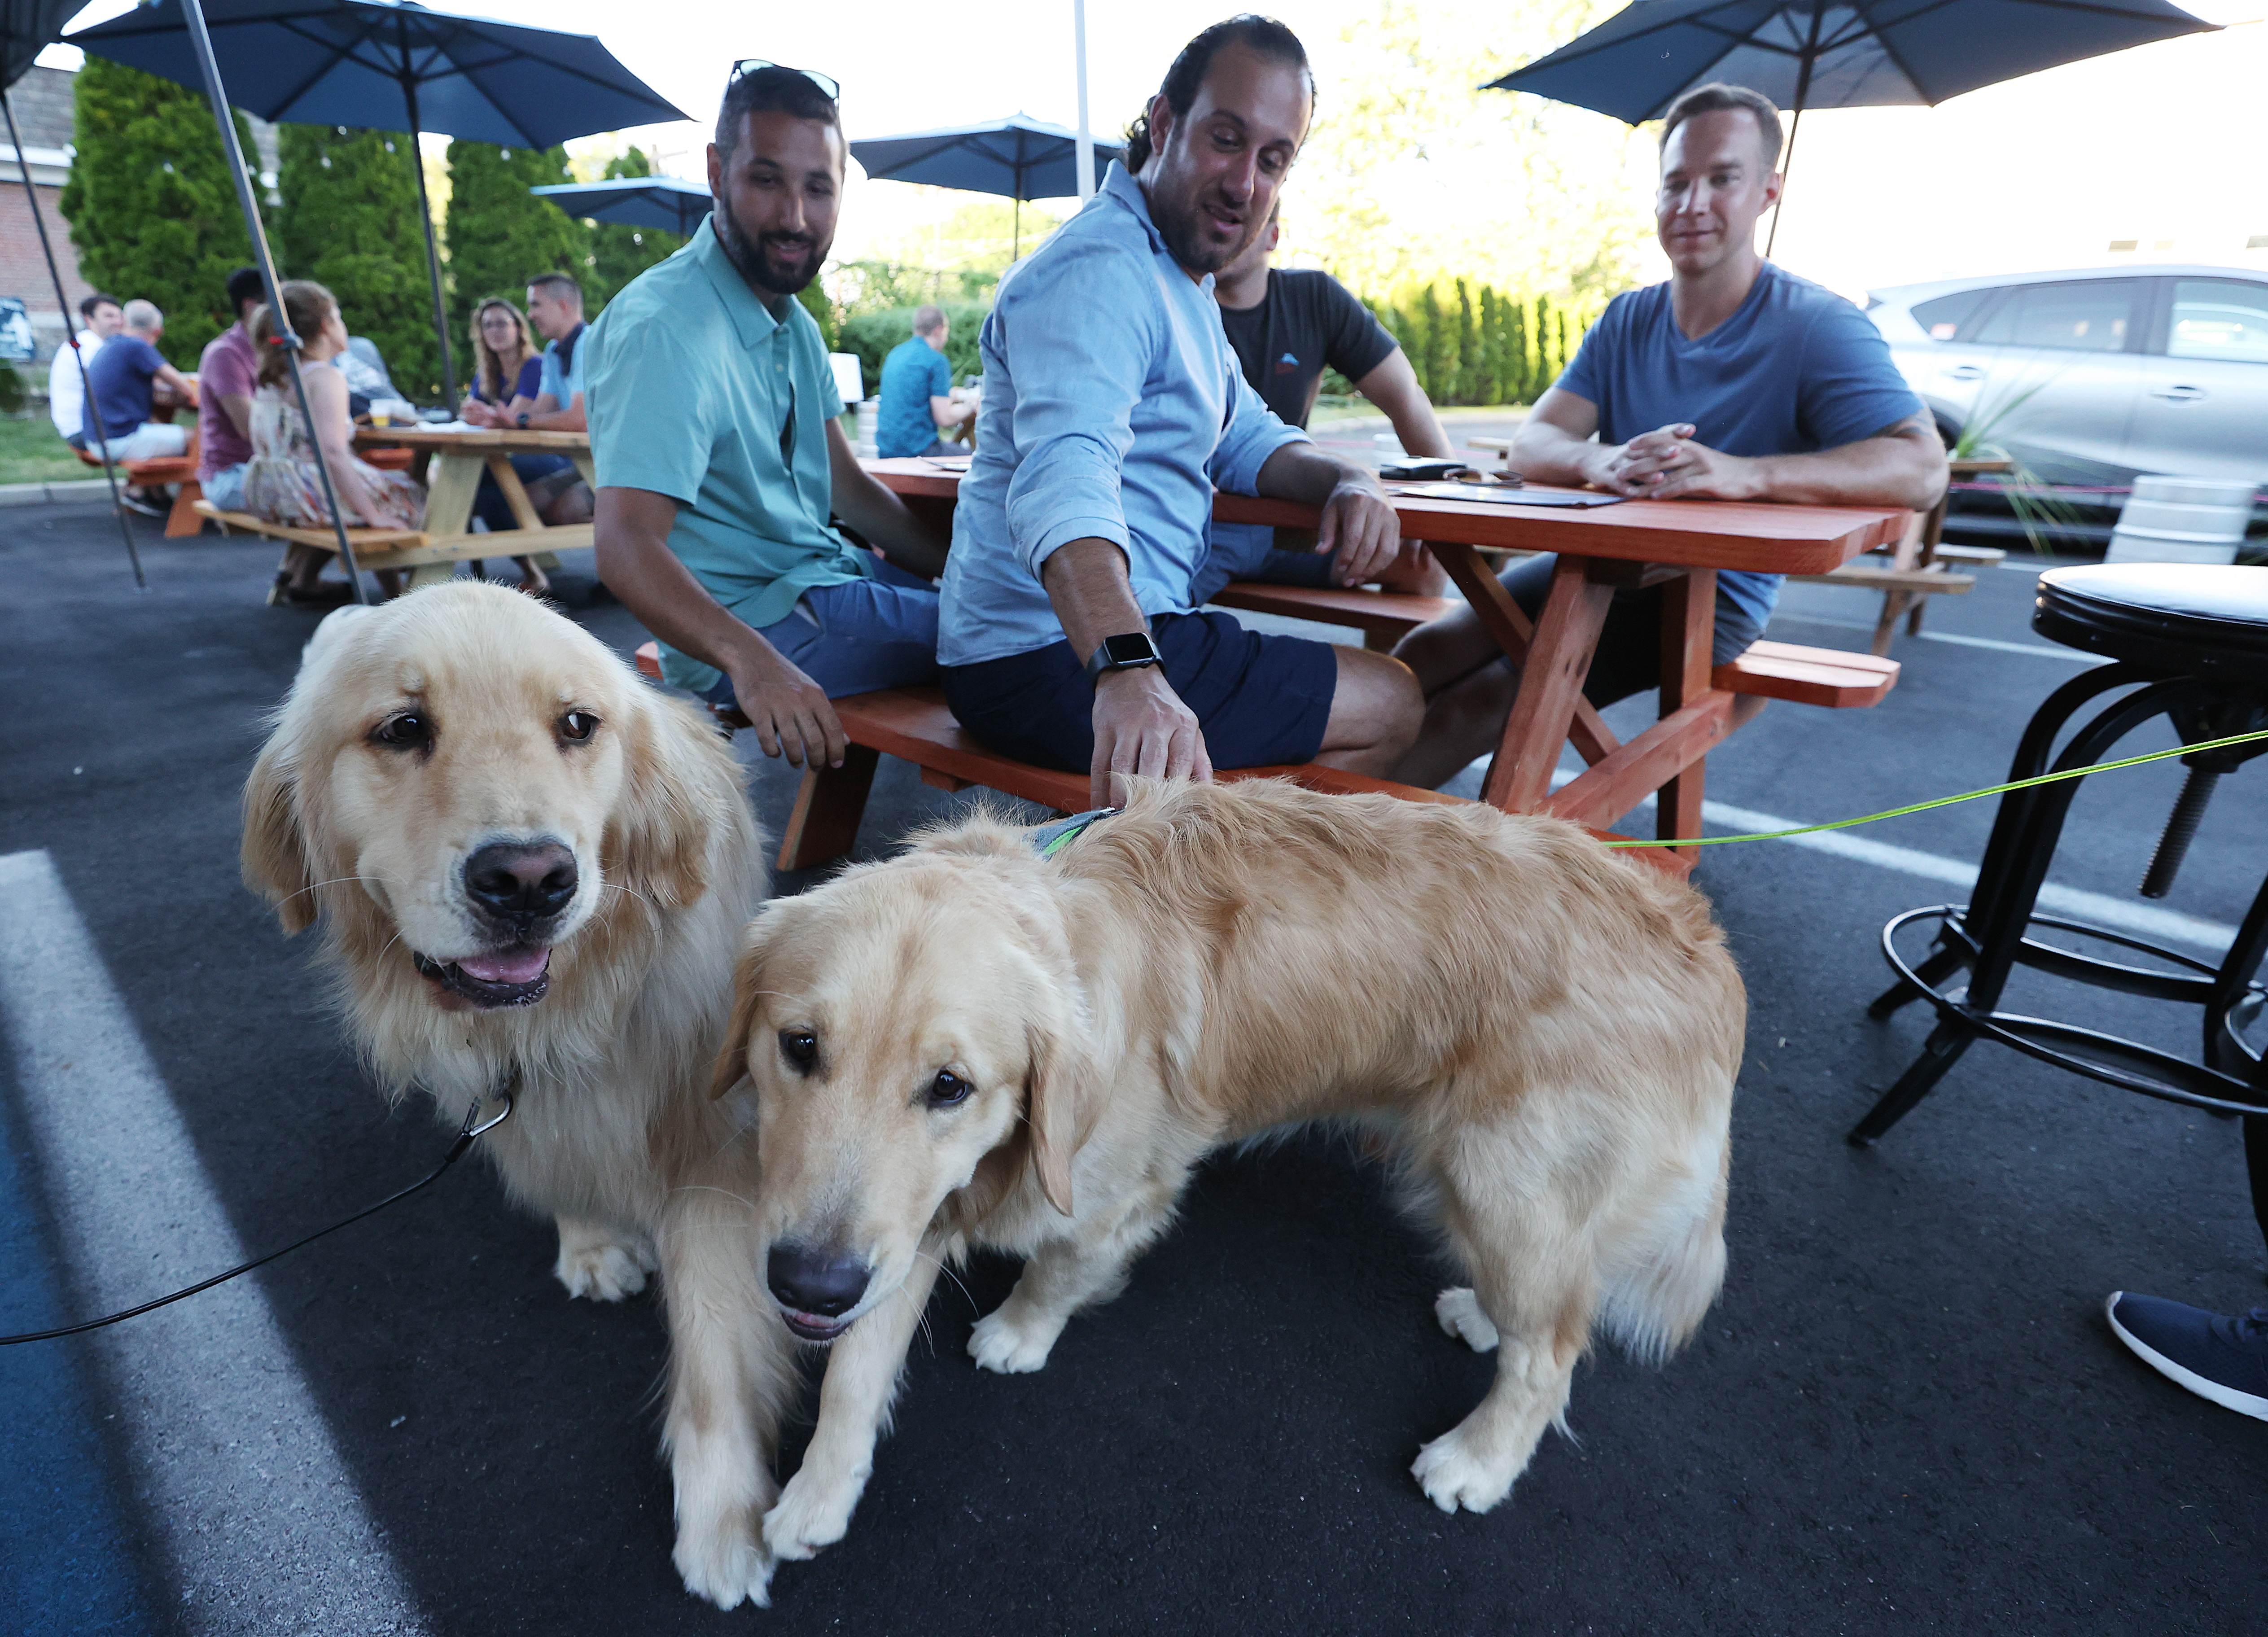 HUNTINGTON, NEW YORK - JUNE 24: Golden retrievers Buddy and Barley greet customers at the Six Harbors Brewing Company on June 24, 2020 in Huntington, New York. Long Island begins Phase 3 of reopening, allowing restaurants to seat inside at 50 percent capacity and nail salons to open by appointment only.   Al Bello/Getty Images/AFP